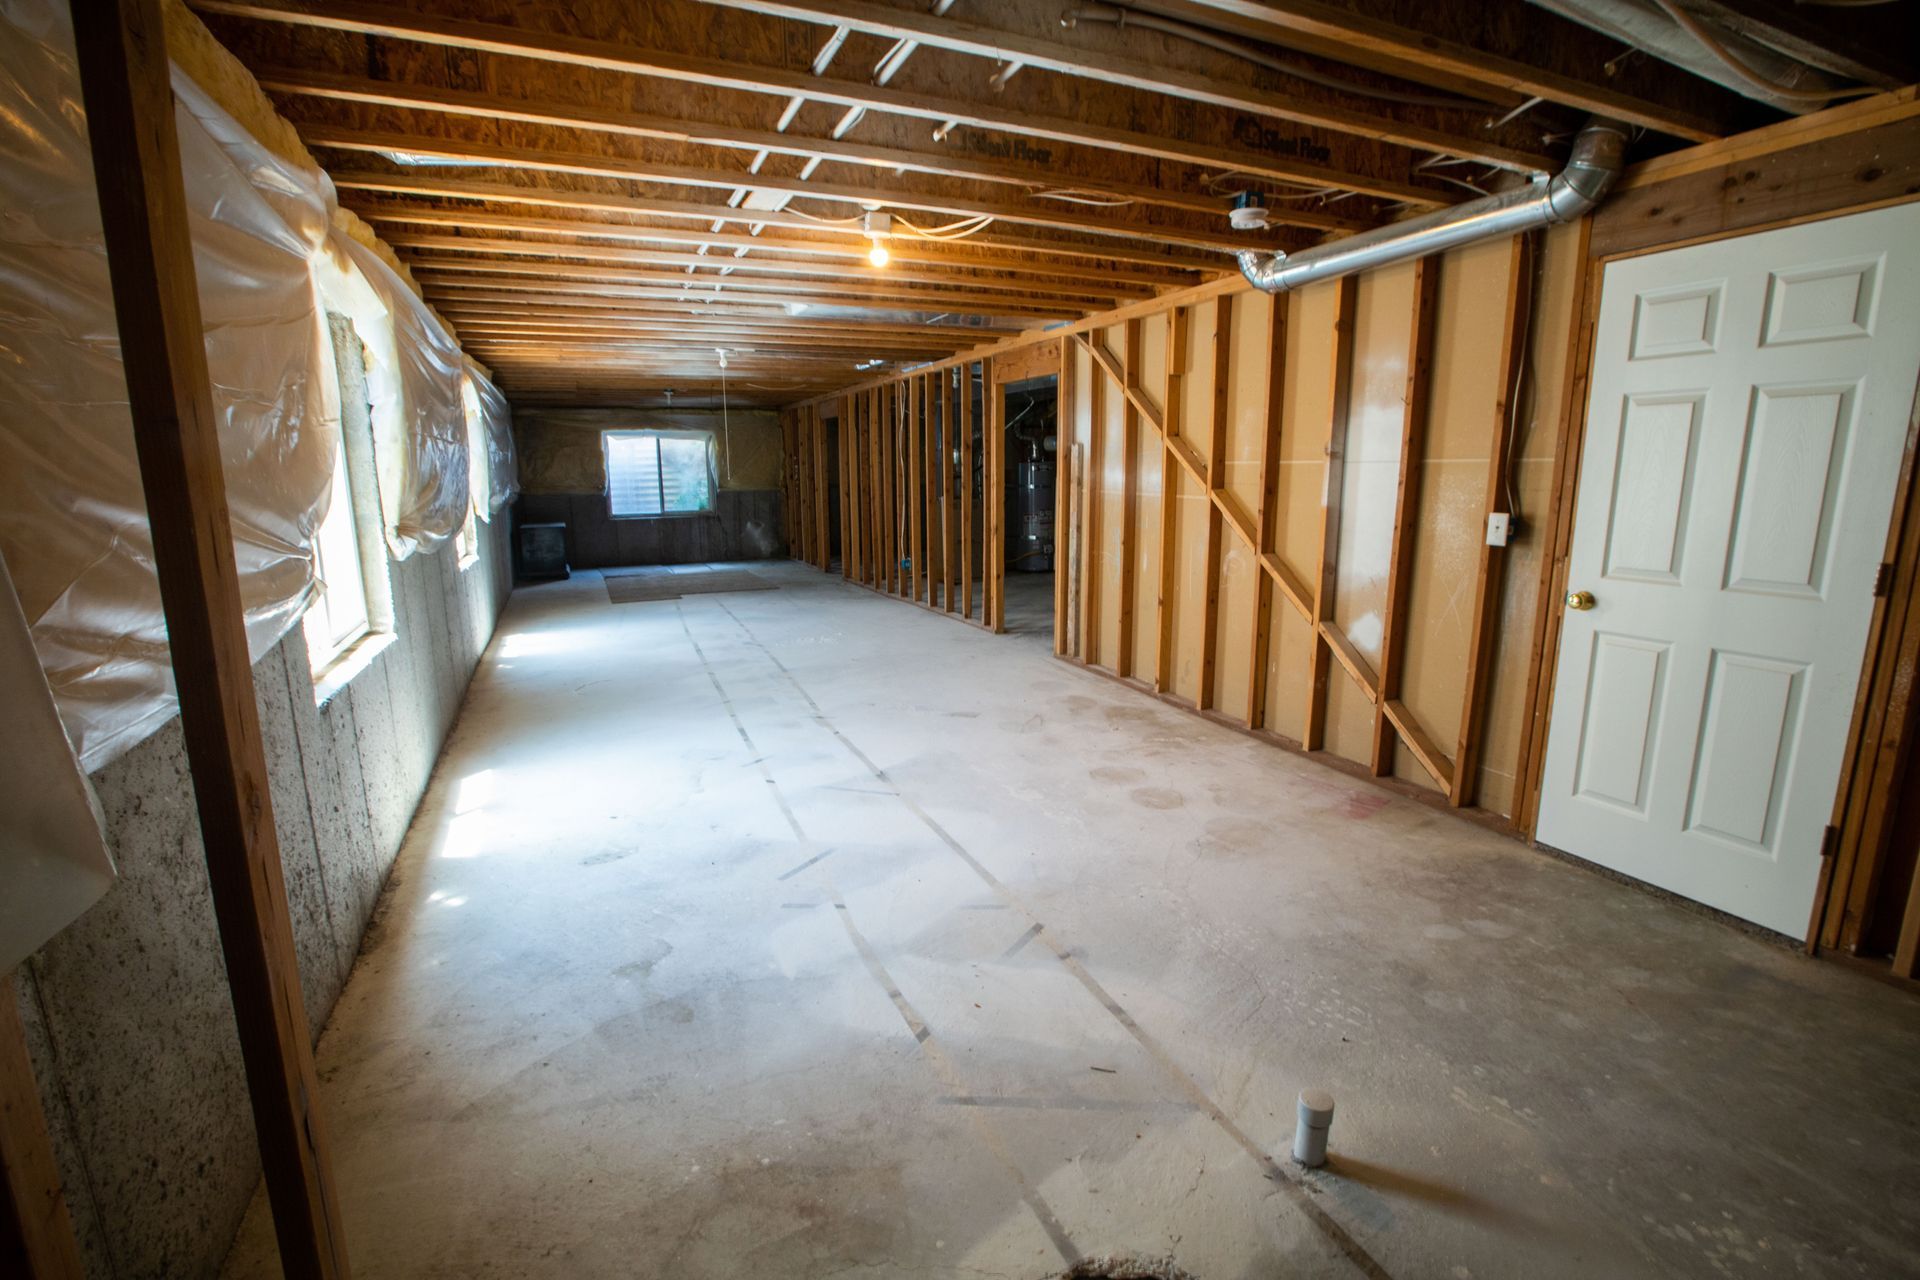 An open basement with exposed pipes and electrical wiring.